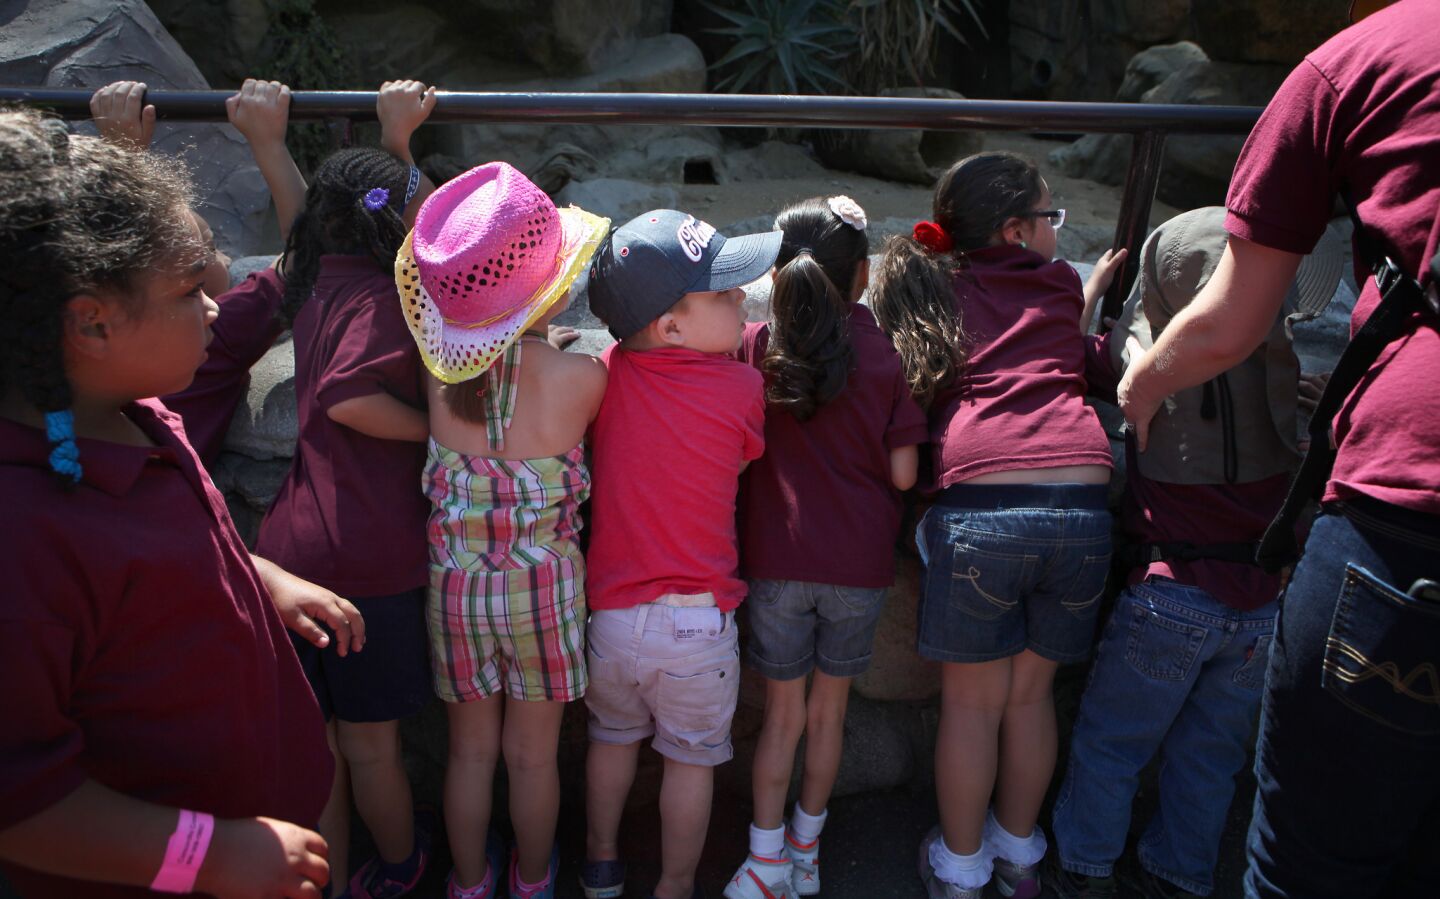 Auguste Majkowski, 3, center, squeezes between other children to get a view of meerkats during an outing to the Los Angeles Zoo before surgery.